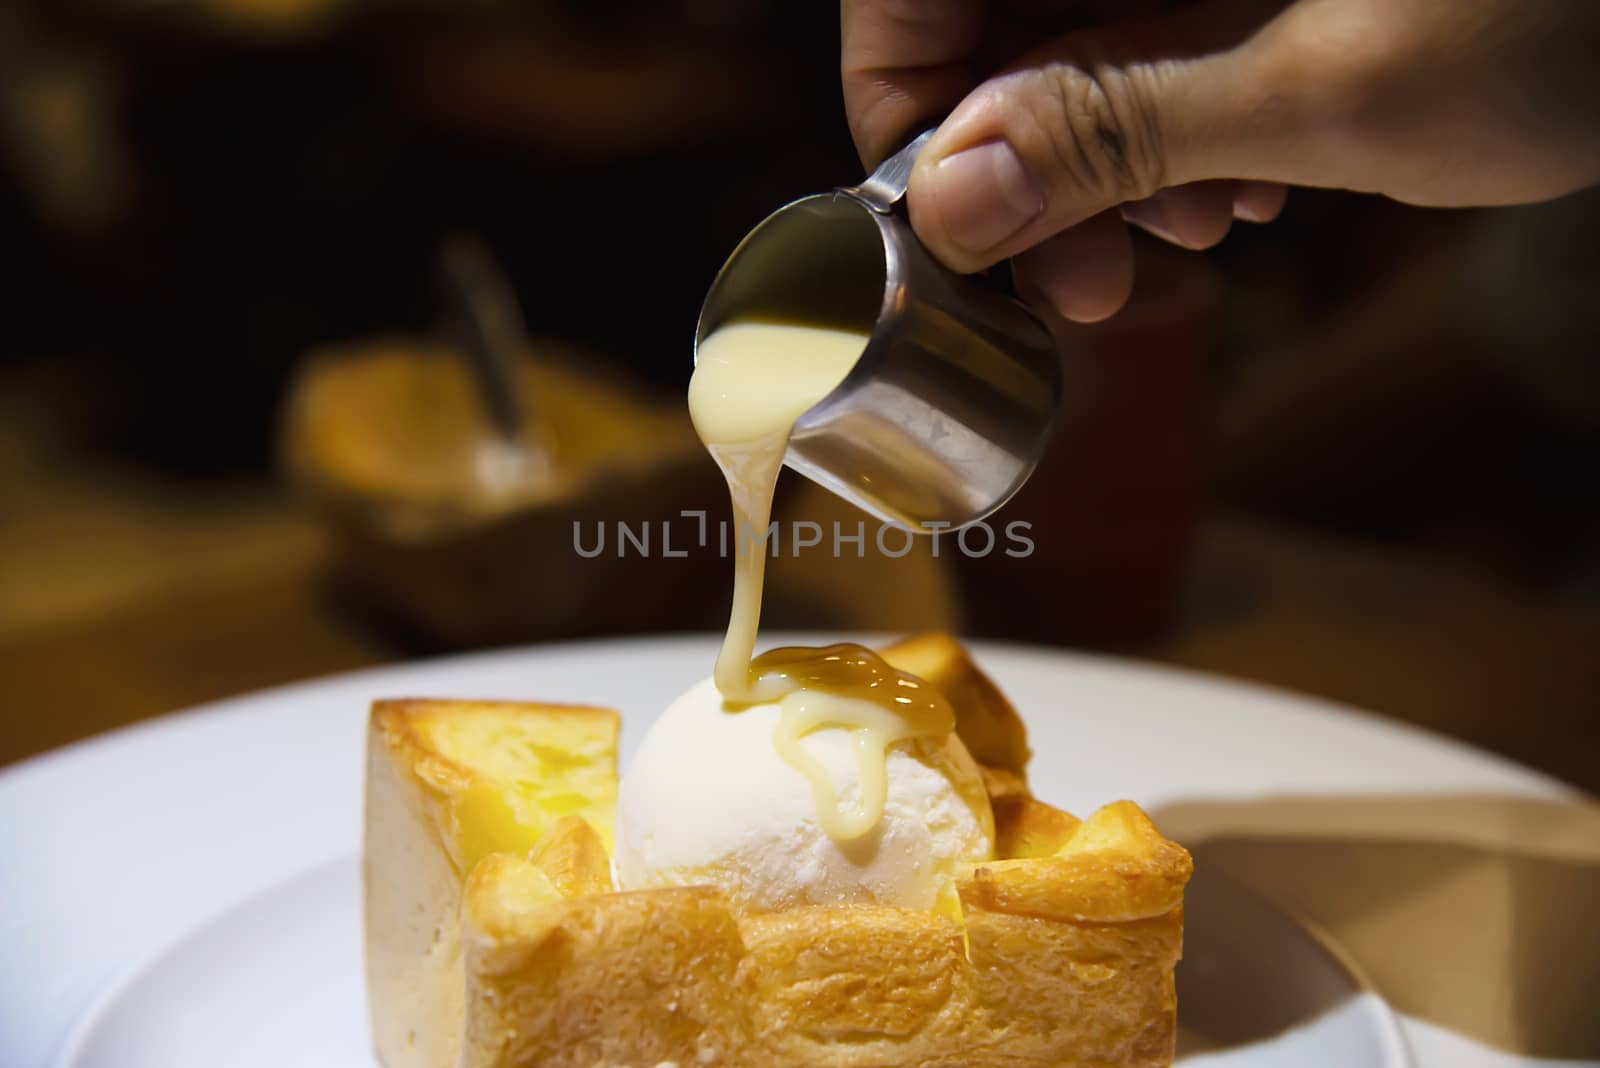 People pouring milk on ice cream bread toast - people with toast dessert sweet eating concept